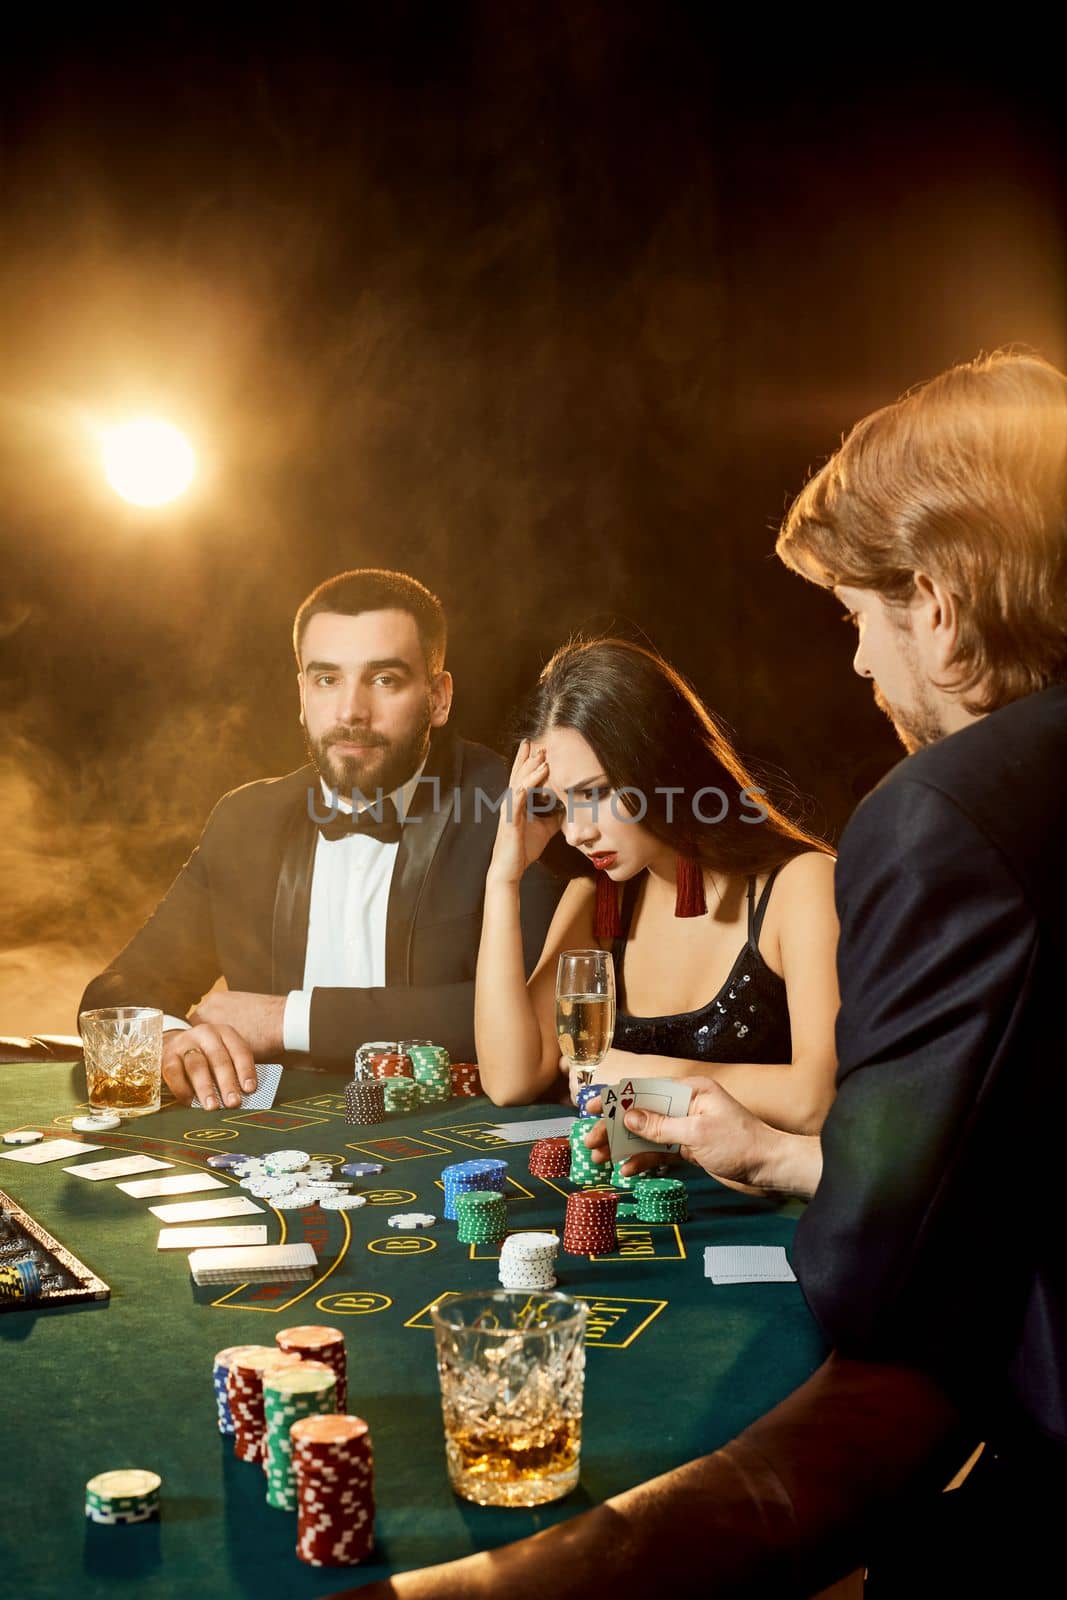 Group of young rich people is playing poker in the casino. Two men in business suits and a young woman in a black dress. Smoke. Casino. Poker